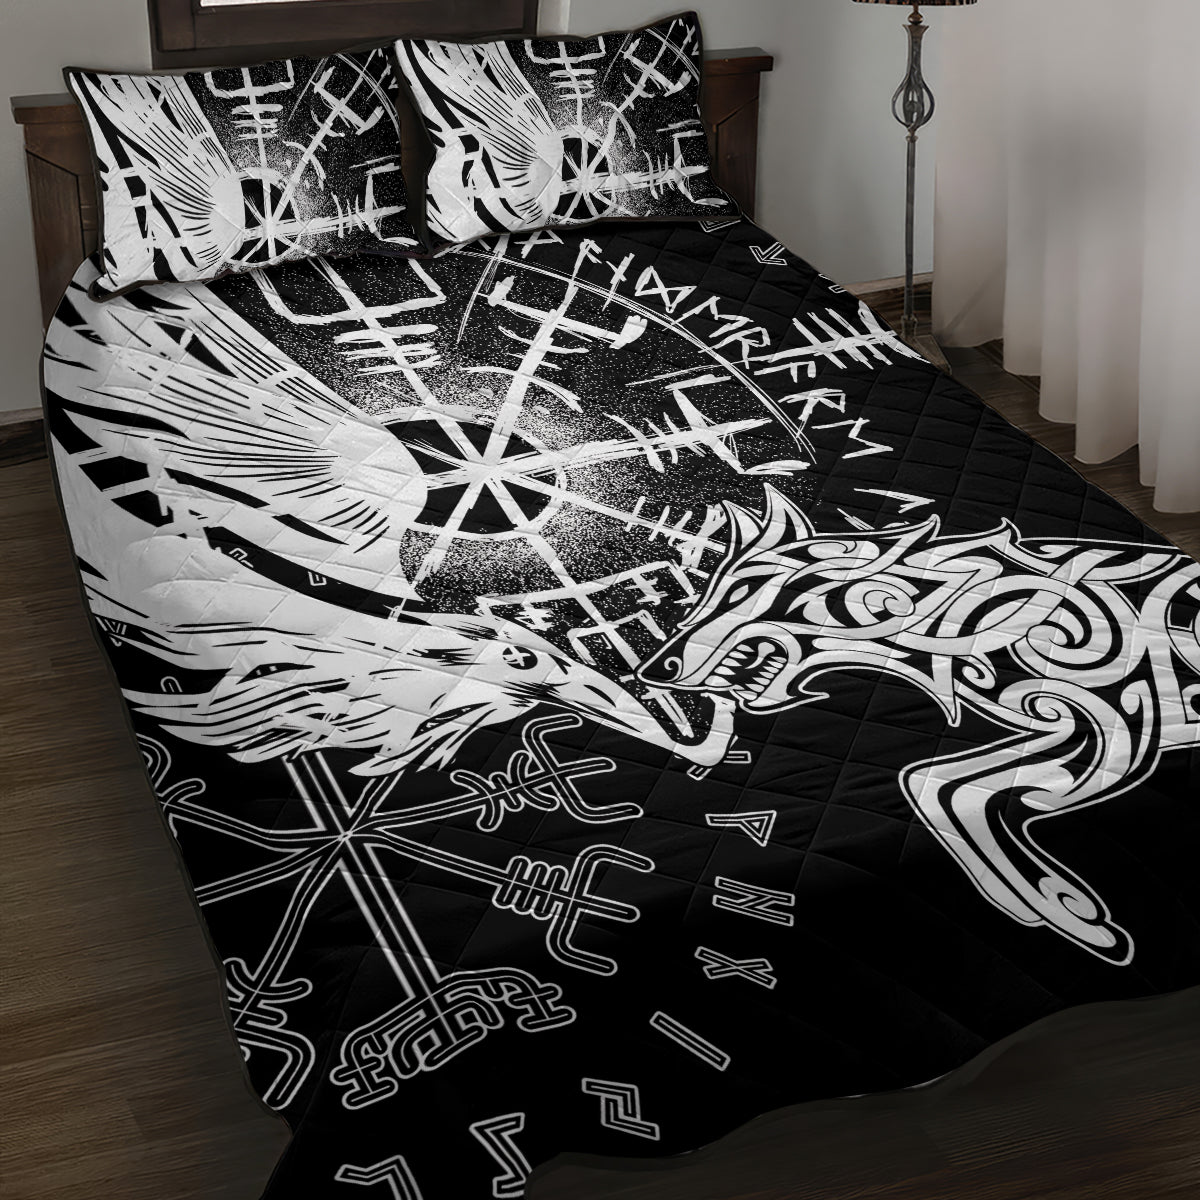 Vikings Raven and Wolf Quilt Bed Set with Aegishjalmur Unique